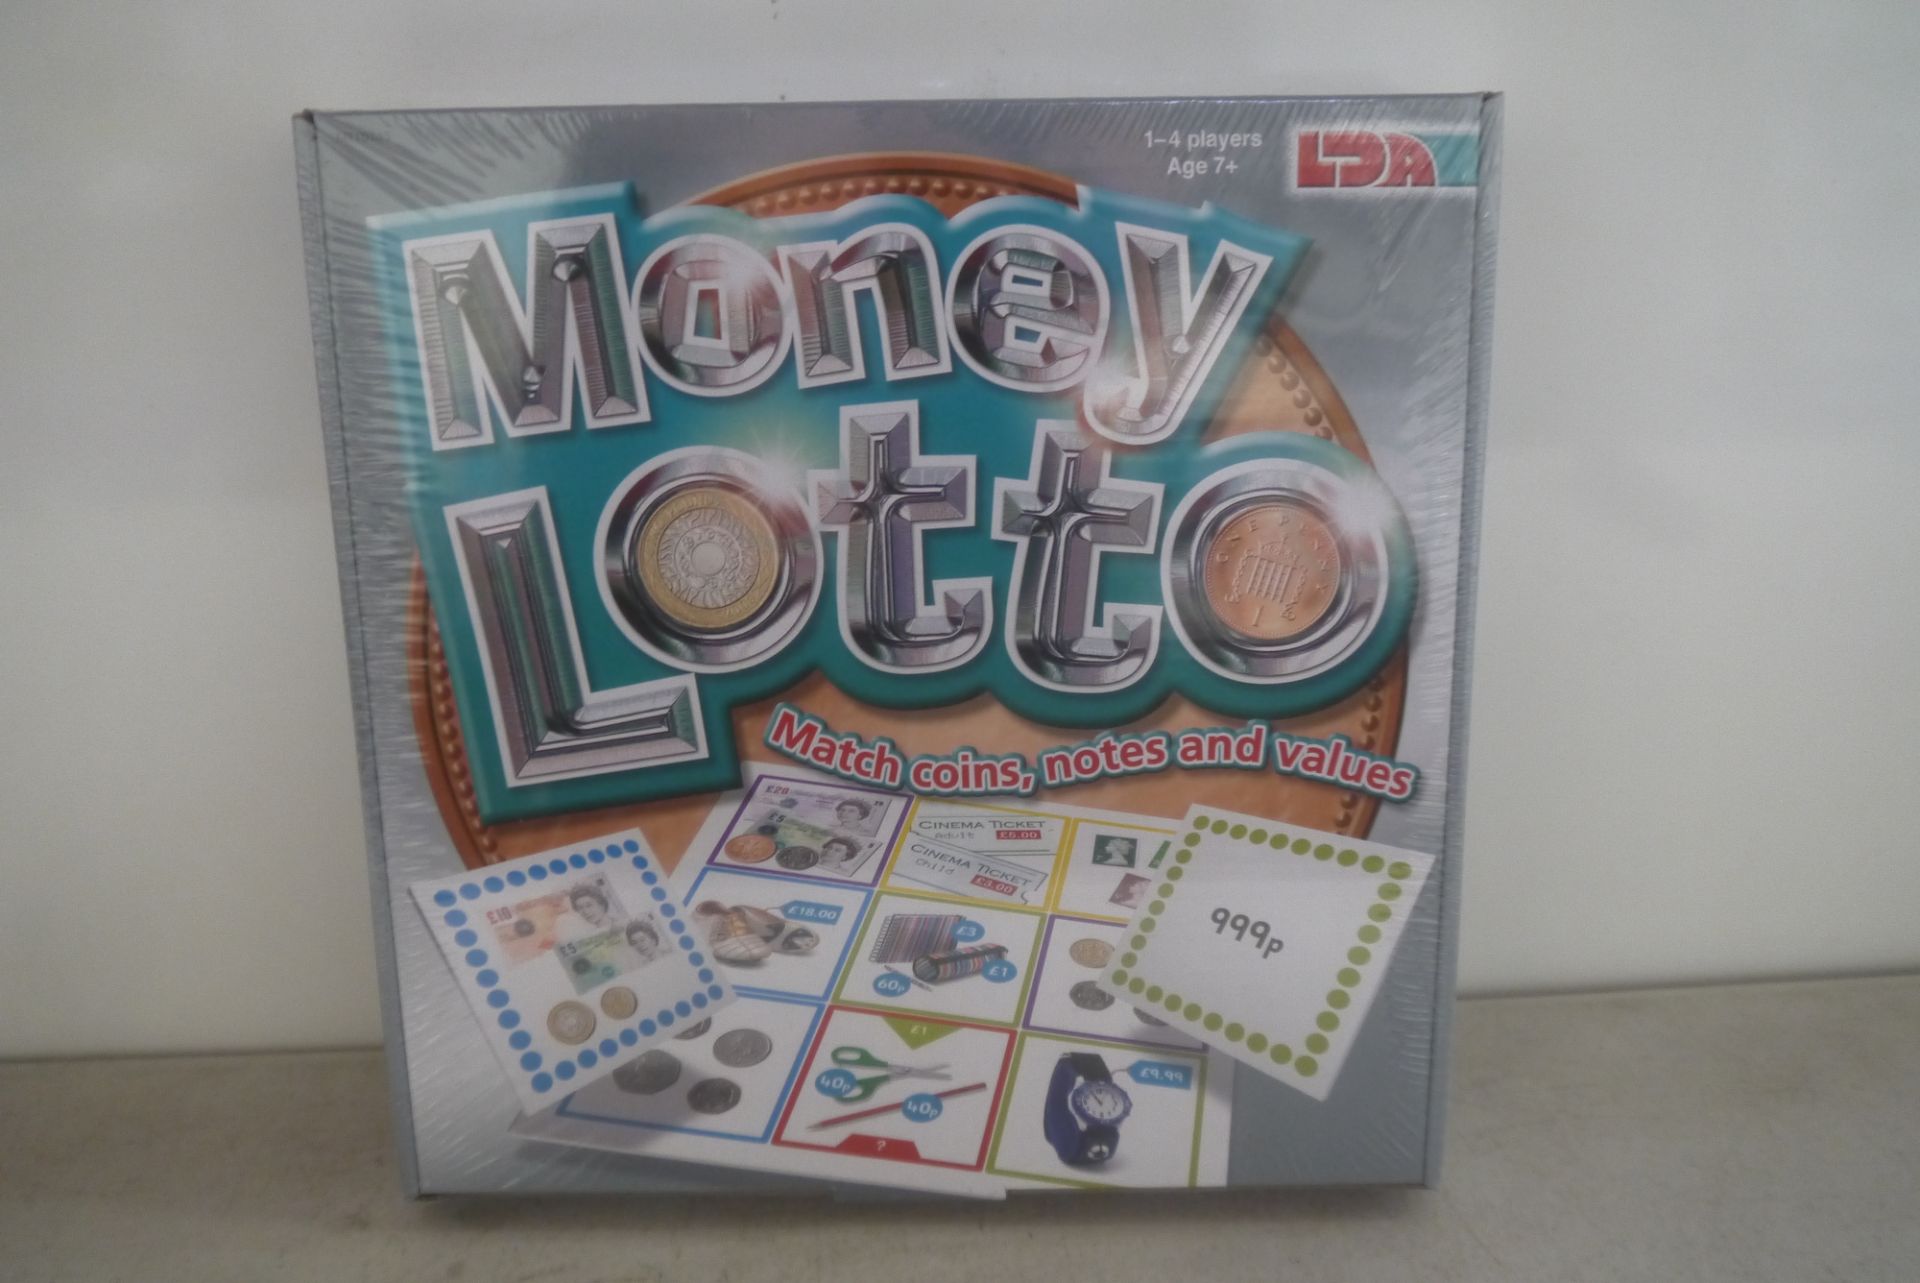 6x LDA money lotto, new and boxed. Combine RRP £89.94